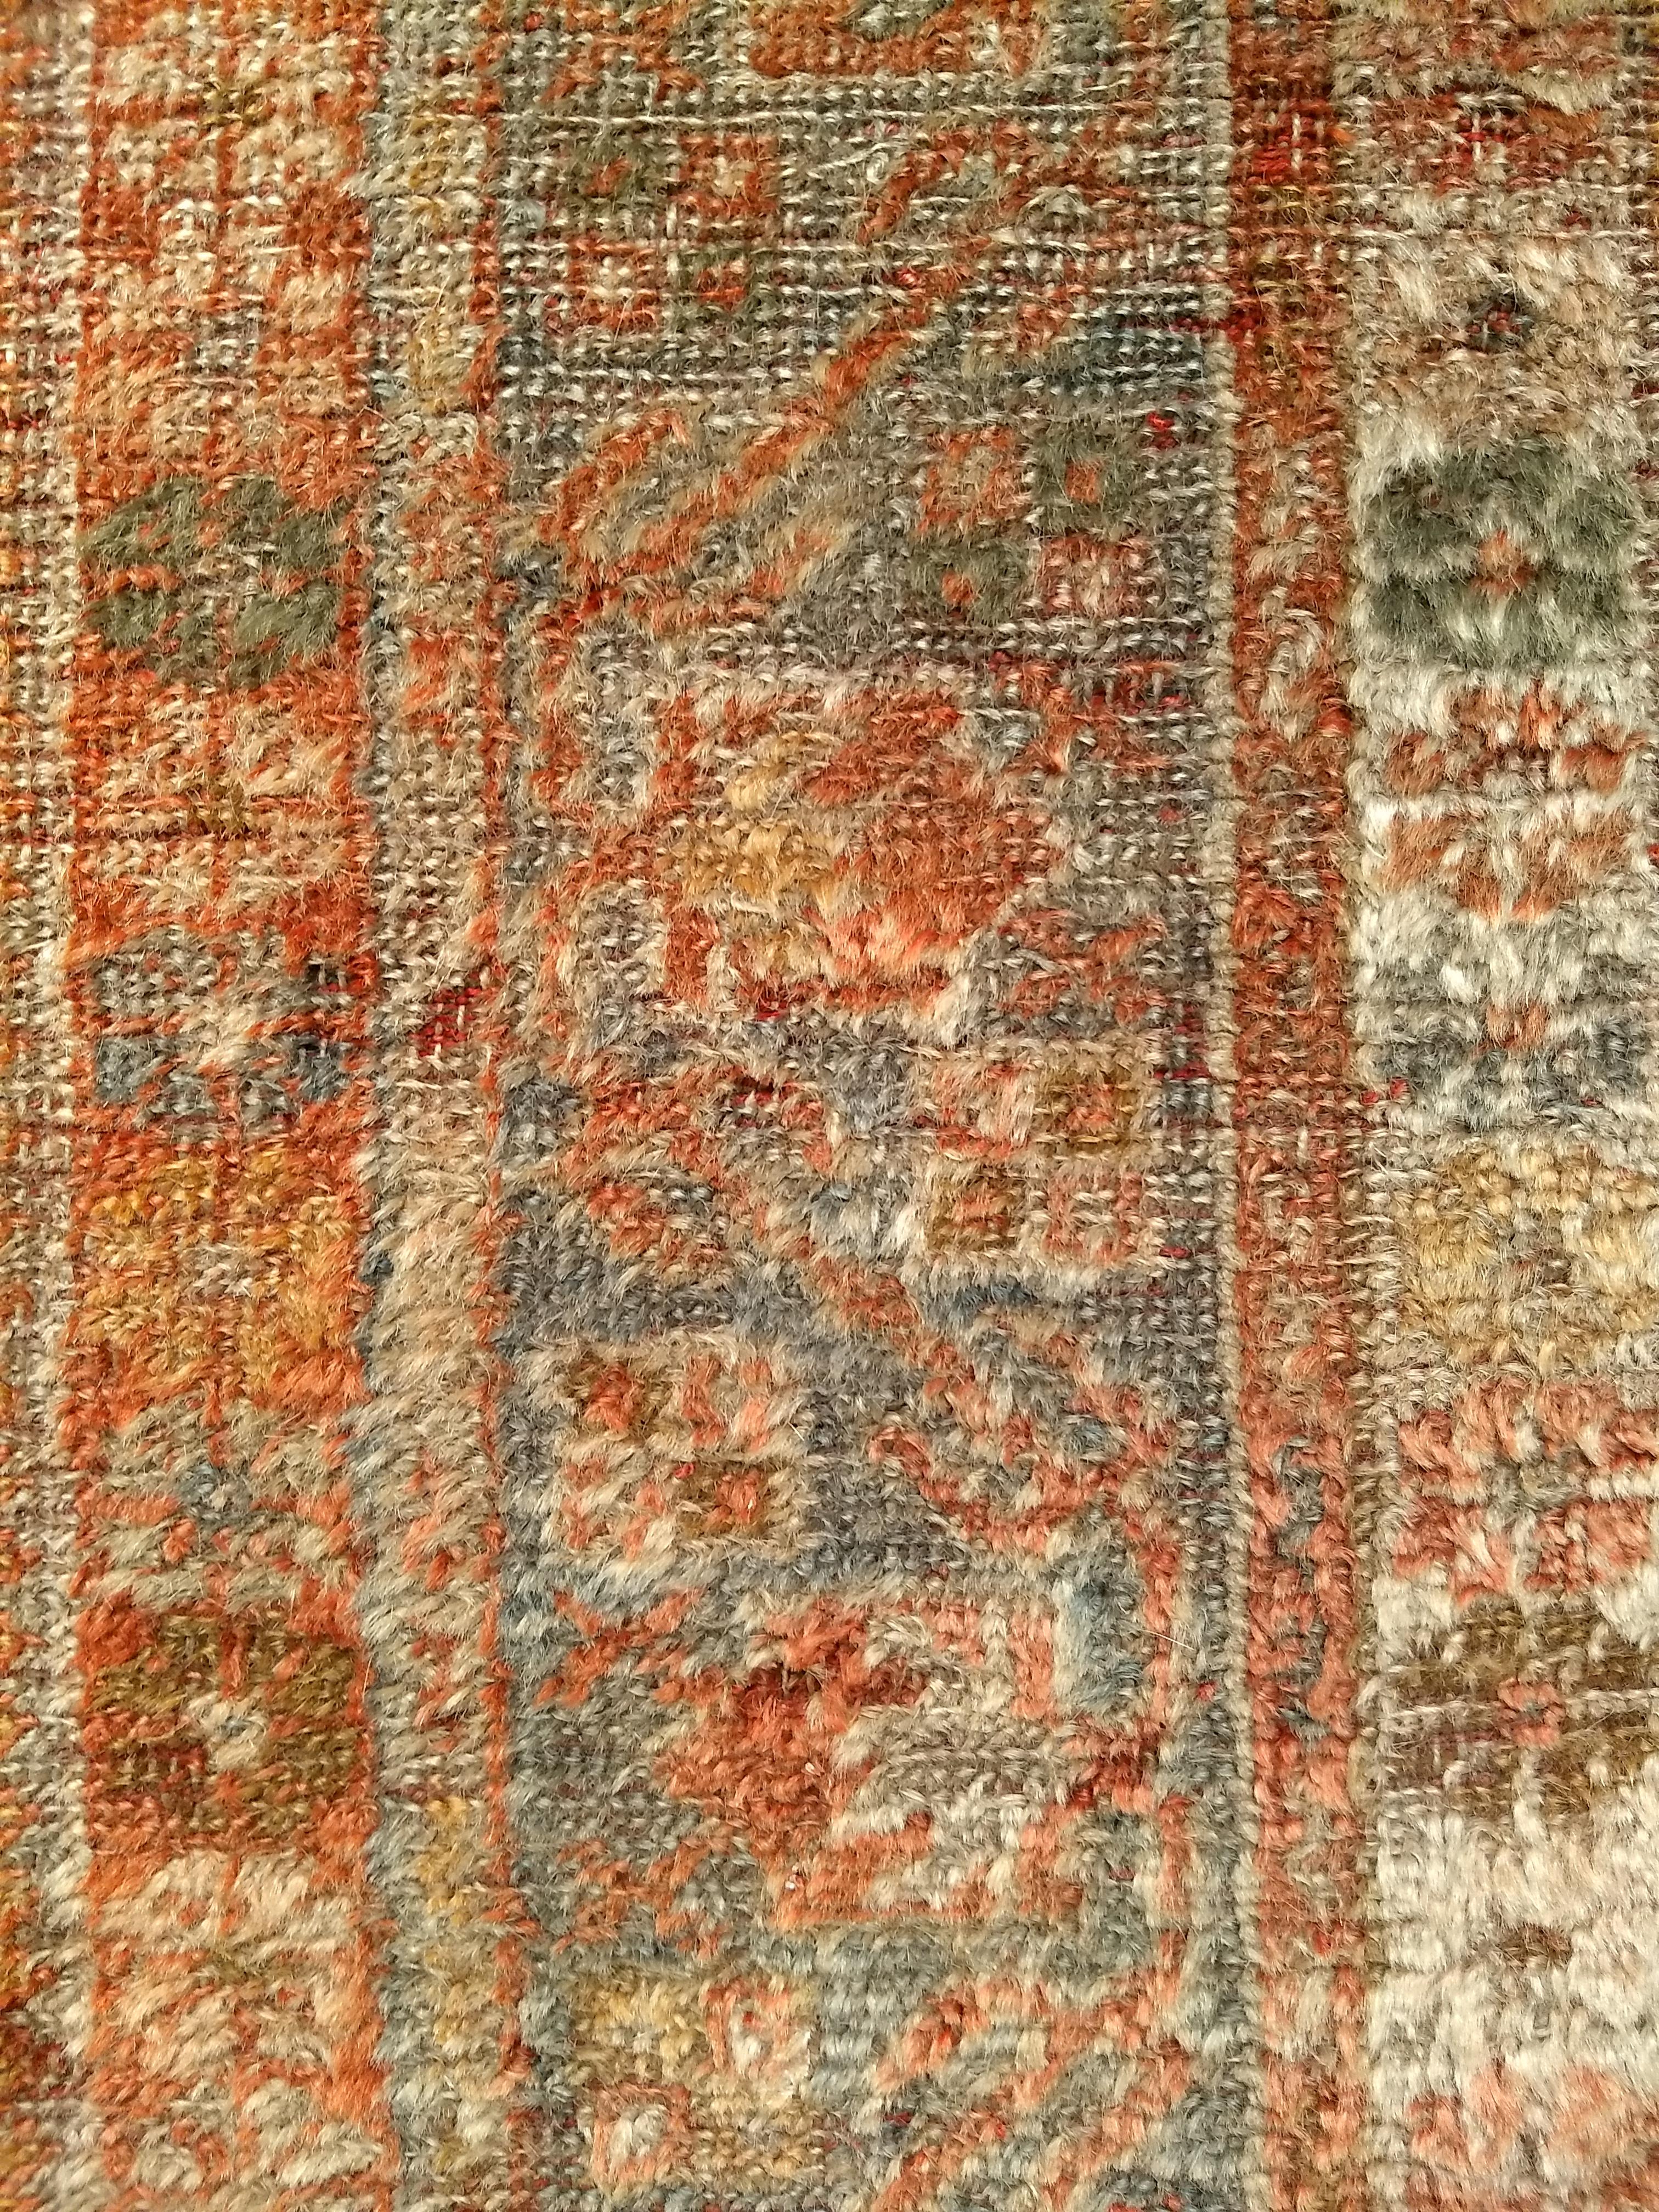 Late 19th Century Turkish Oushak Area Rug in Mamluk Pattern in Saffron, Teal For Sale 2